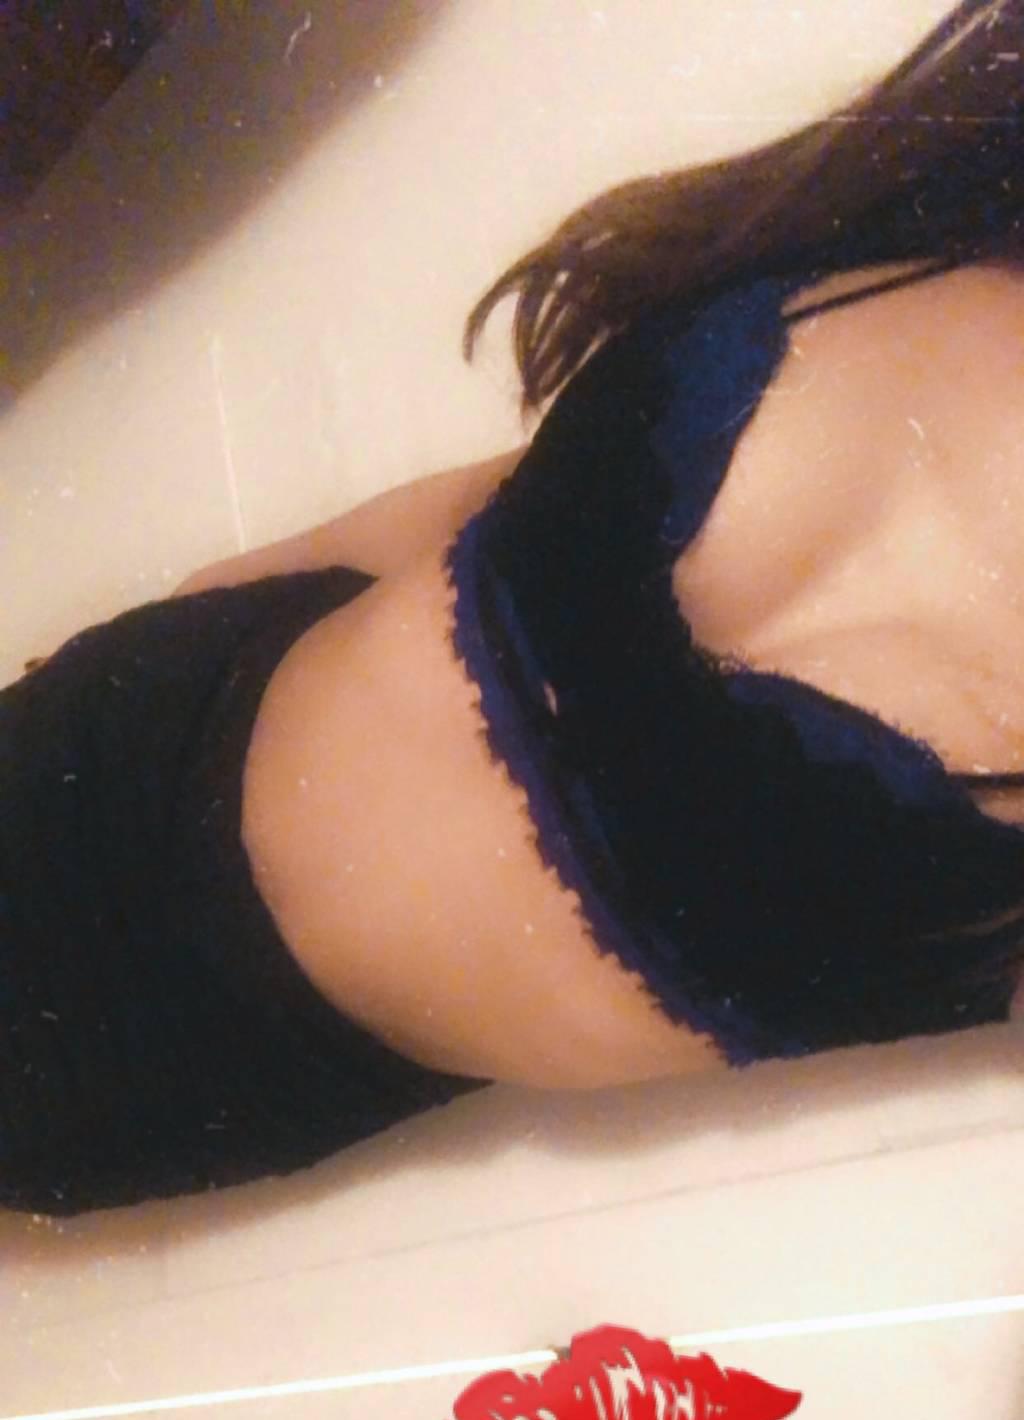 Kimberly Anne petite..... is Female Escorts. | Montreal | Quebec | Canada | scarletamour.com 